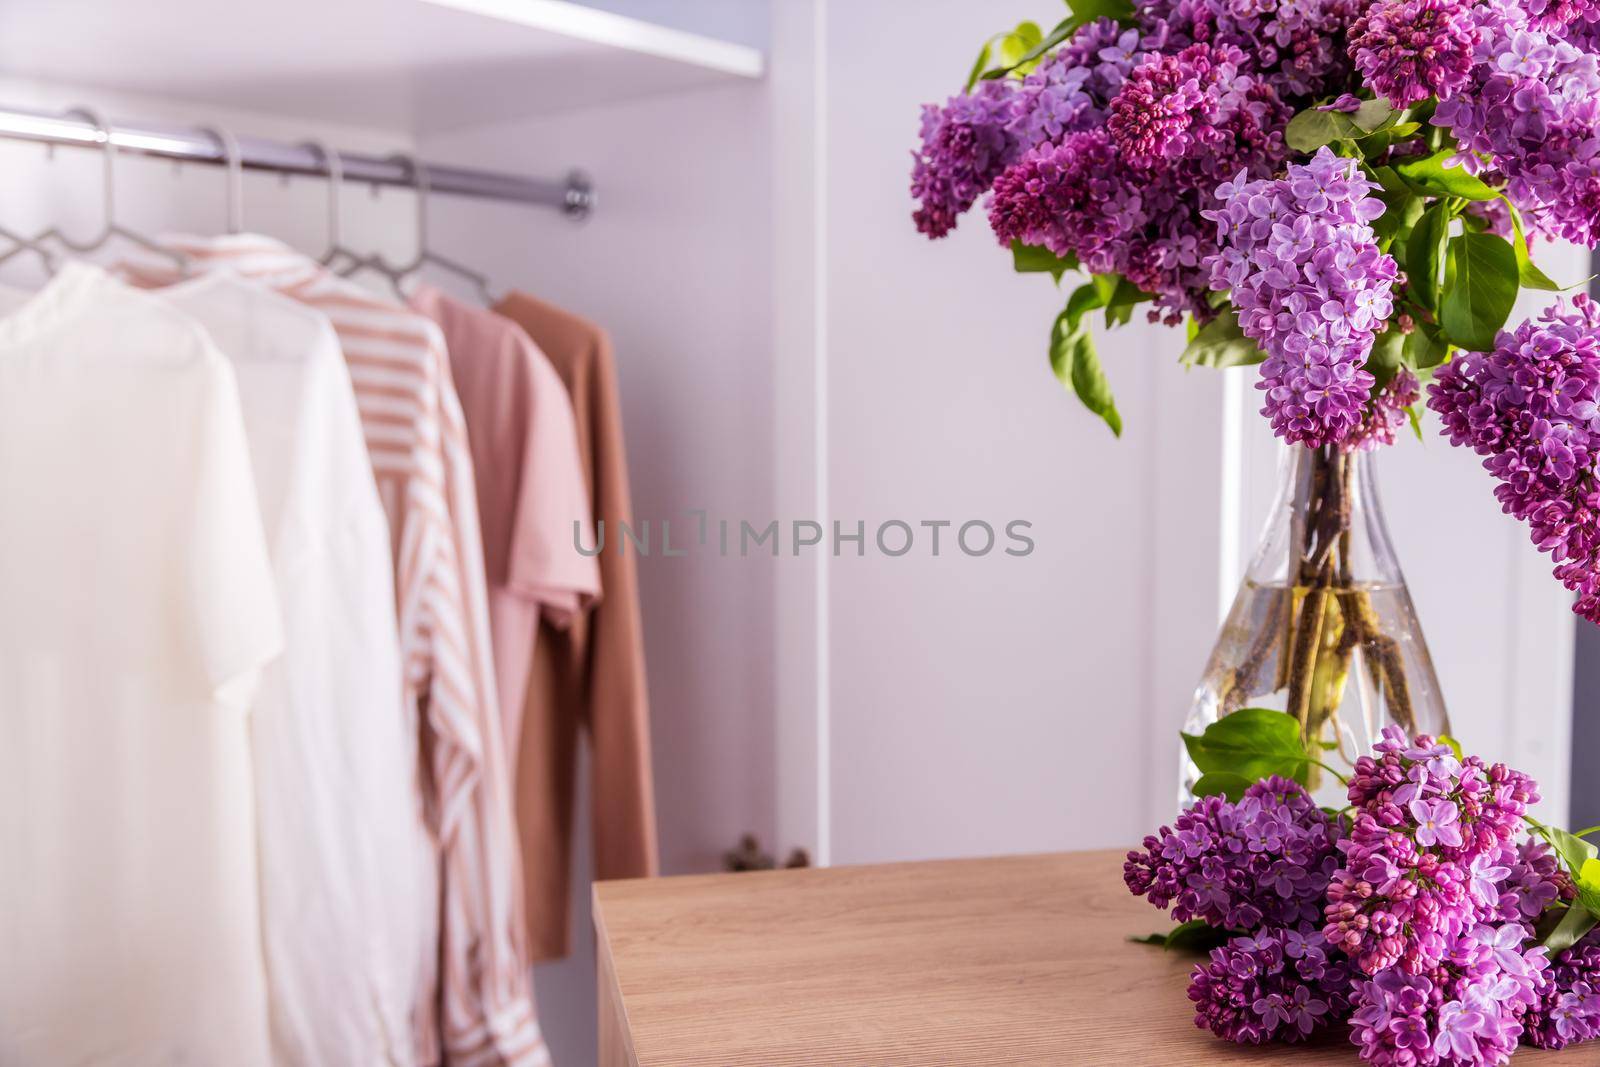 Women's clothes in pink and beige on a white hanger in an open closet. Wooden table in the foreground with copy paste for text or product. on a wooden table there is a vase with lilac branches